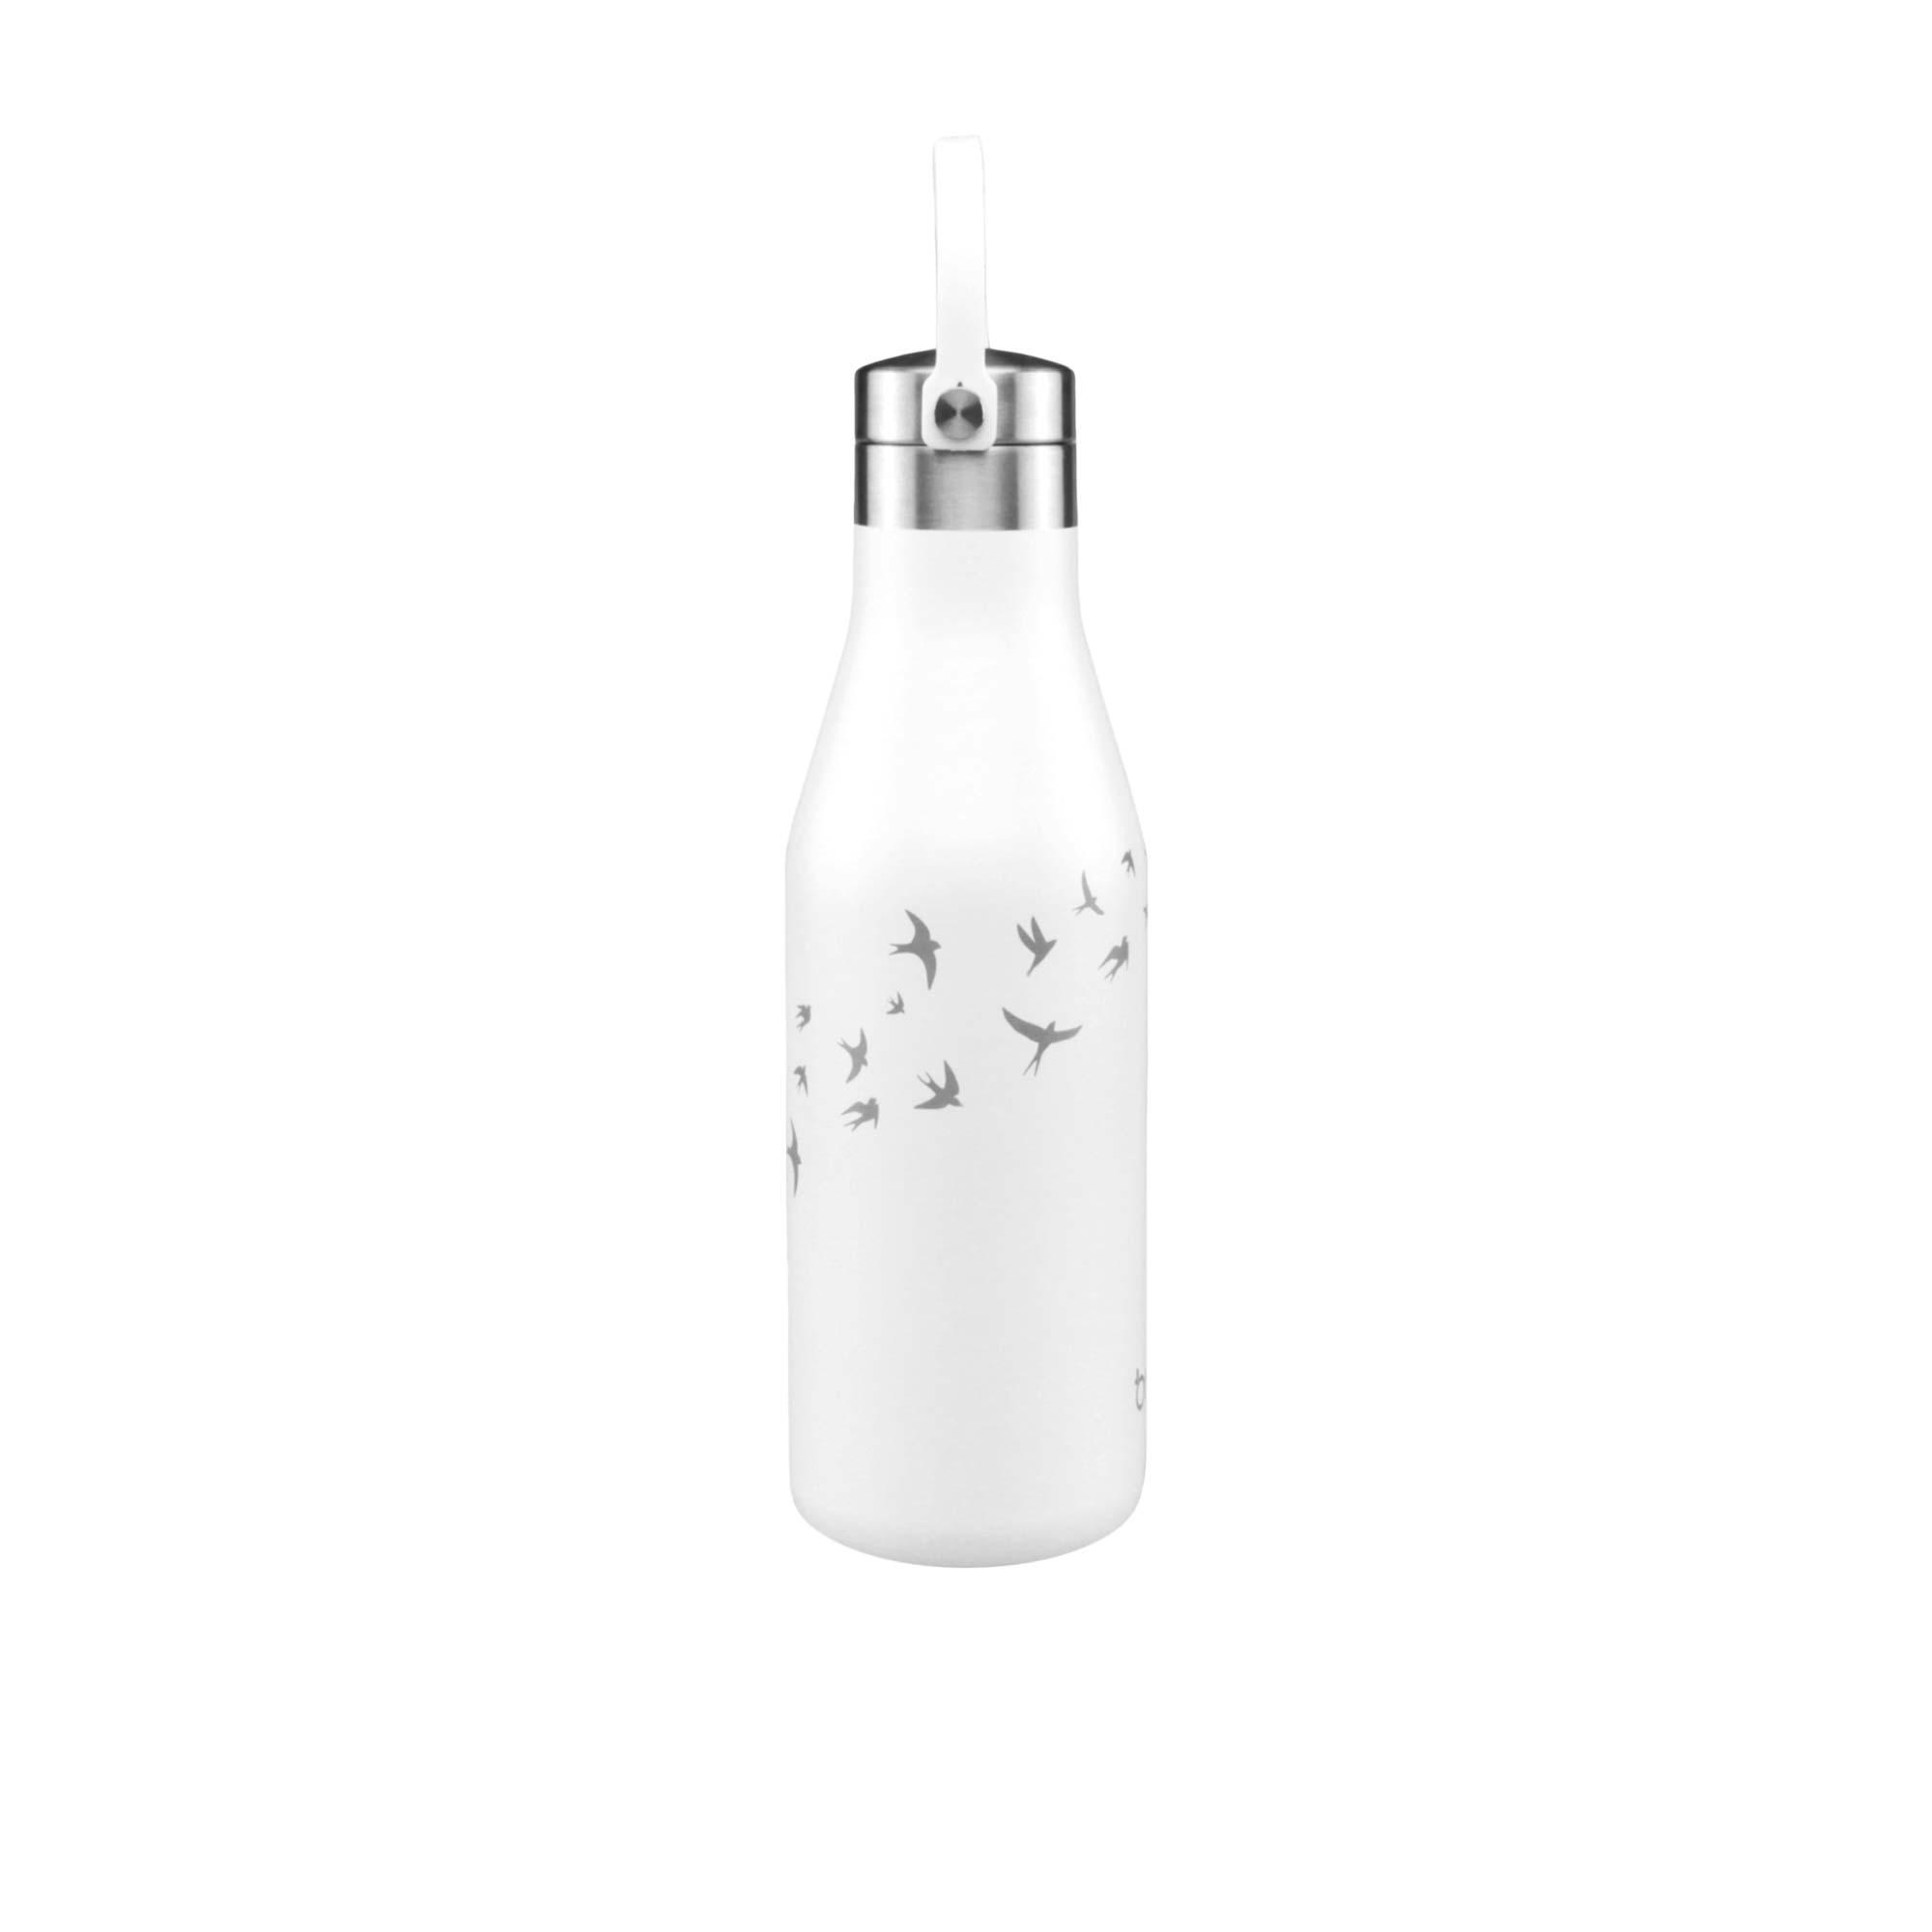 Ohelo Insulated Drink Bottle 500ml White Image 4